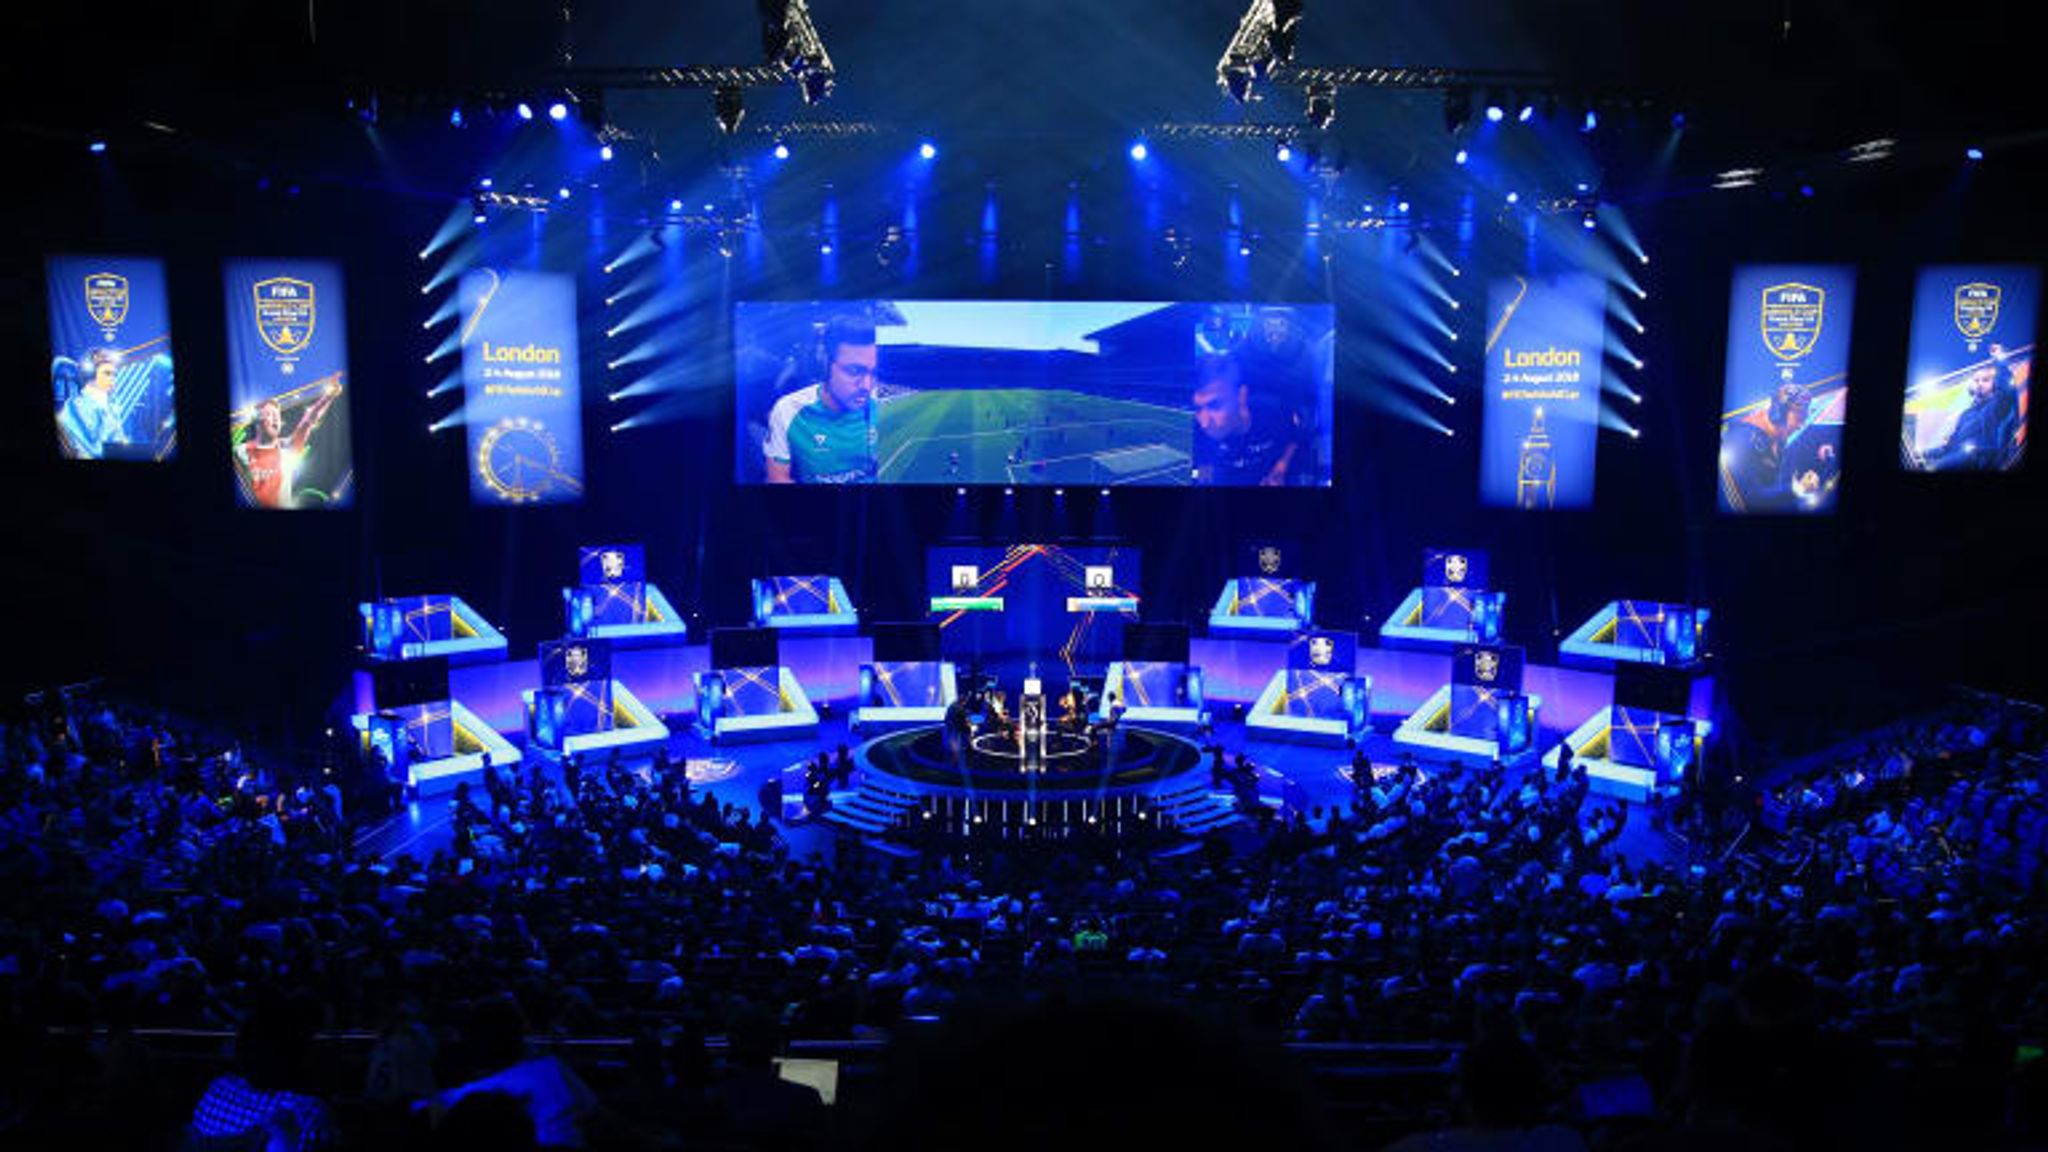 Want to get paid to play? Everyone has a new opportunity in eSports through EA Sports FC 24